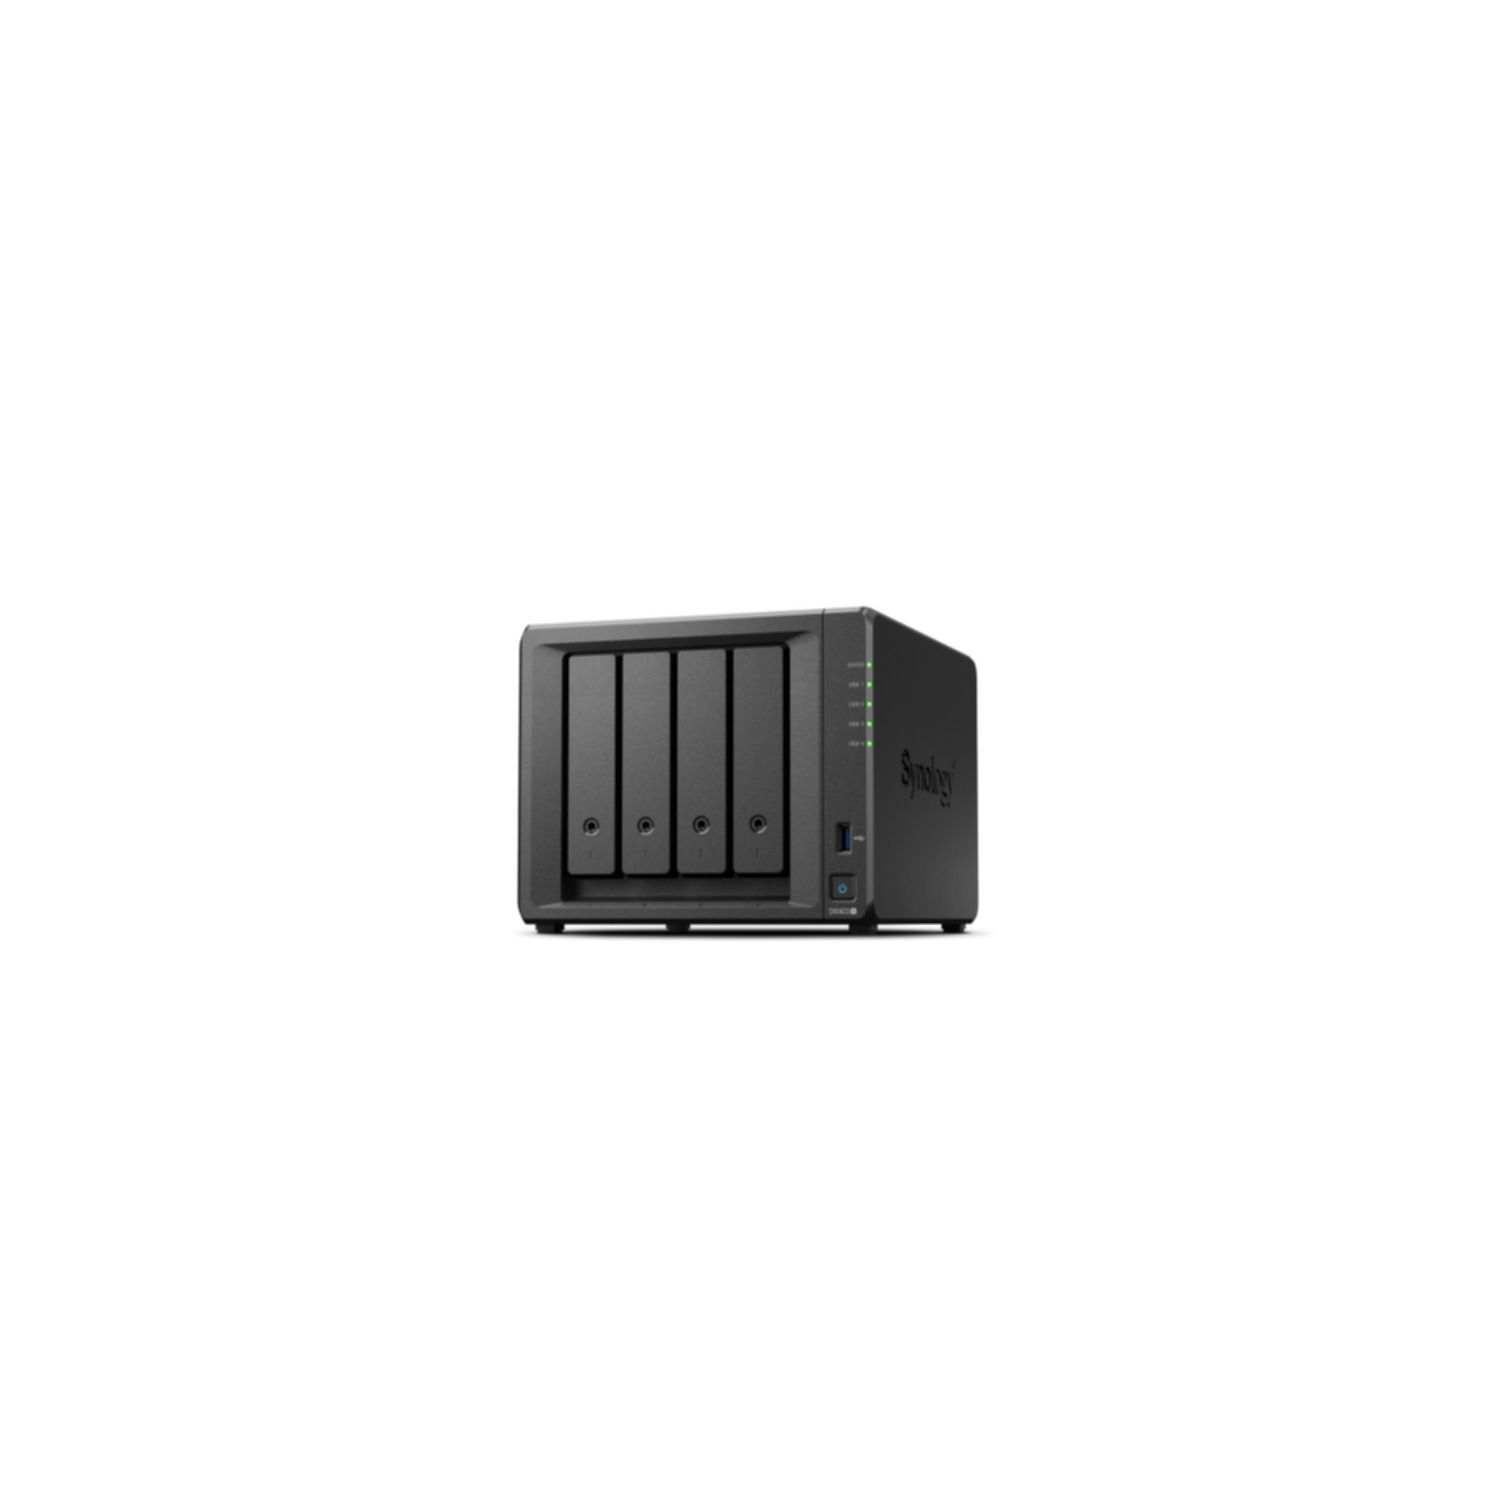 Zoll TB 3,5 extern SYNOLOGY 0 DS923+